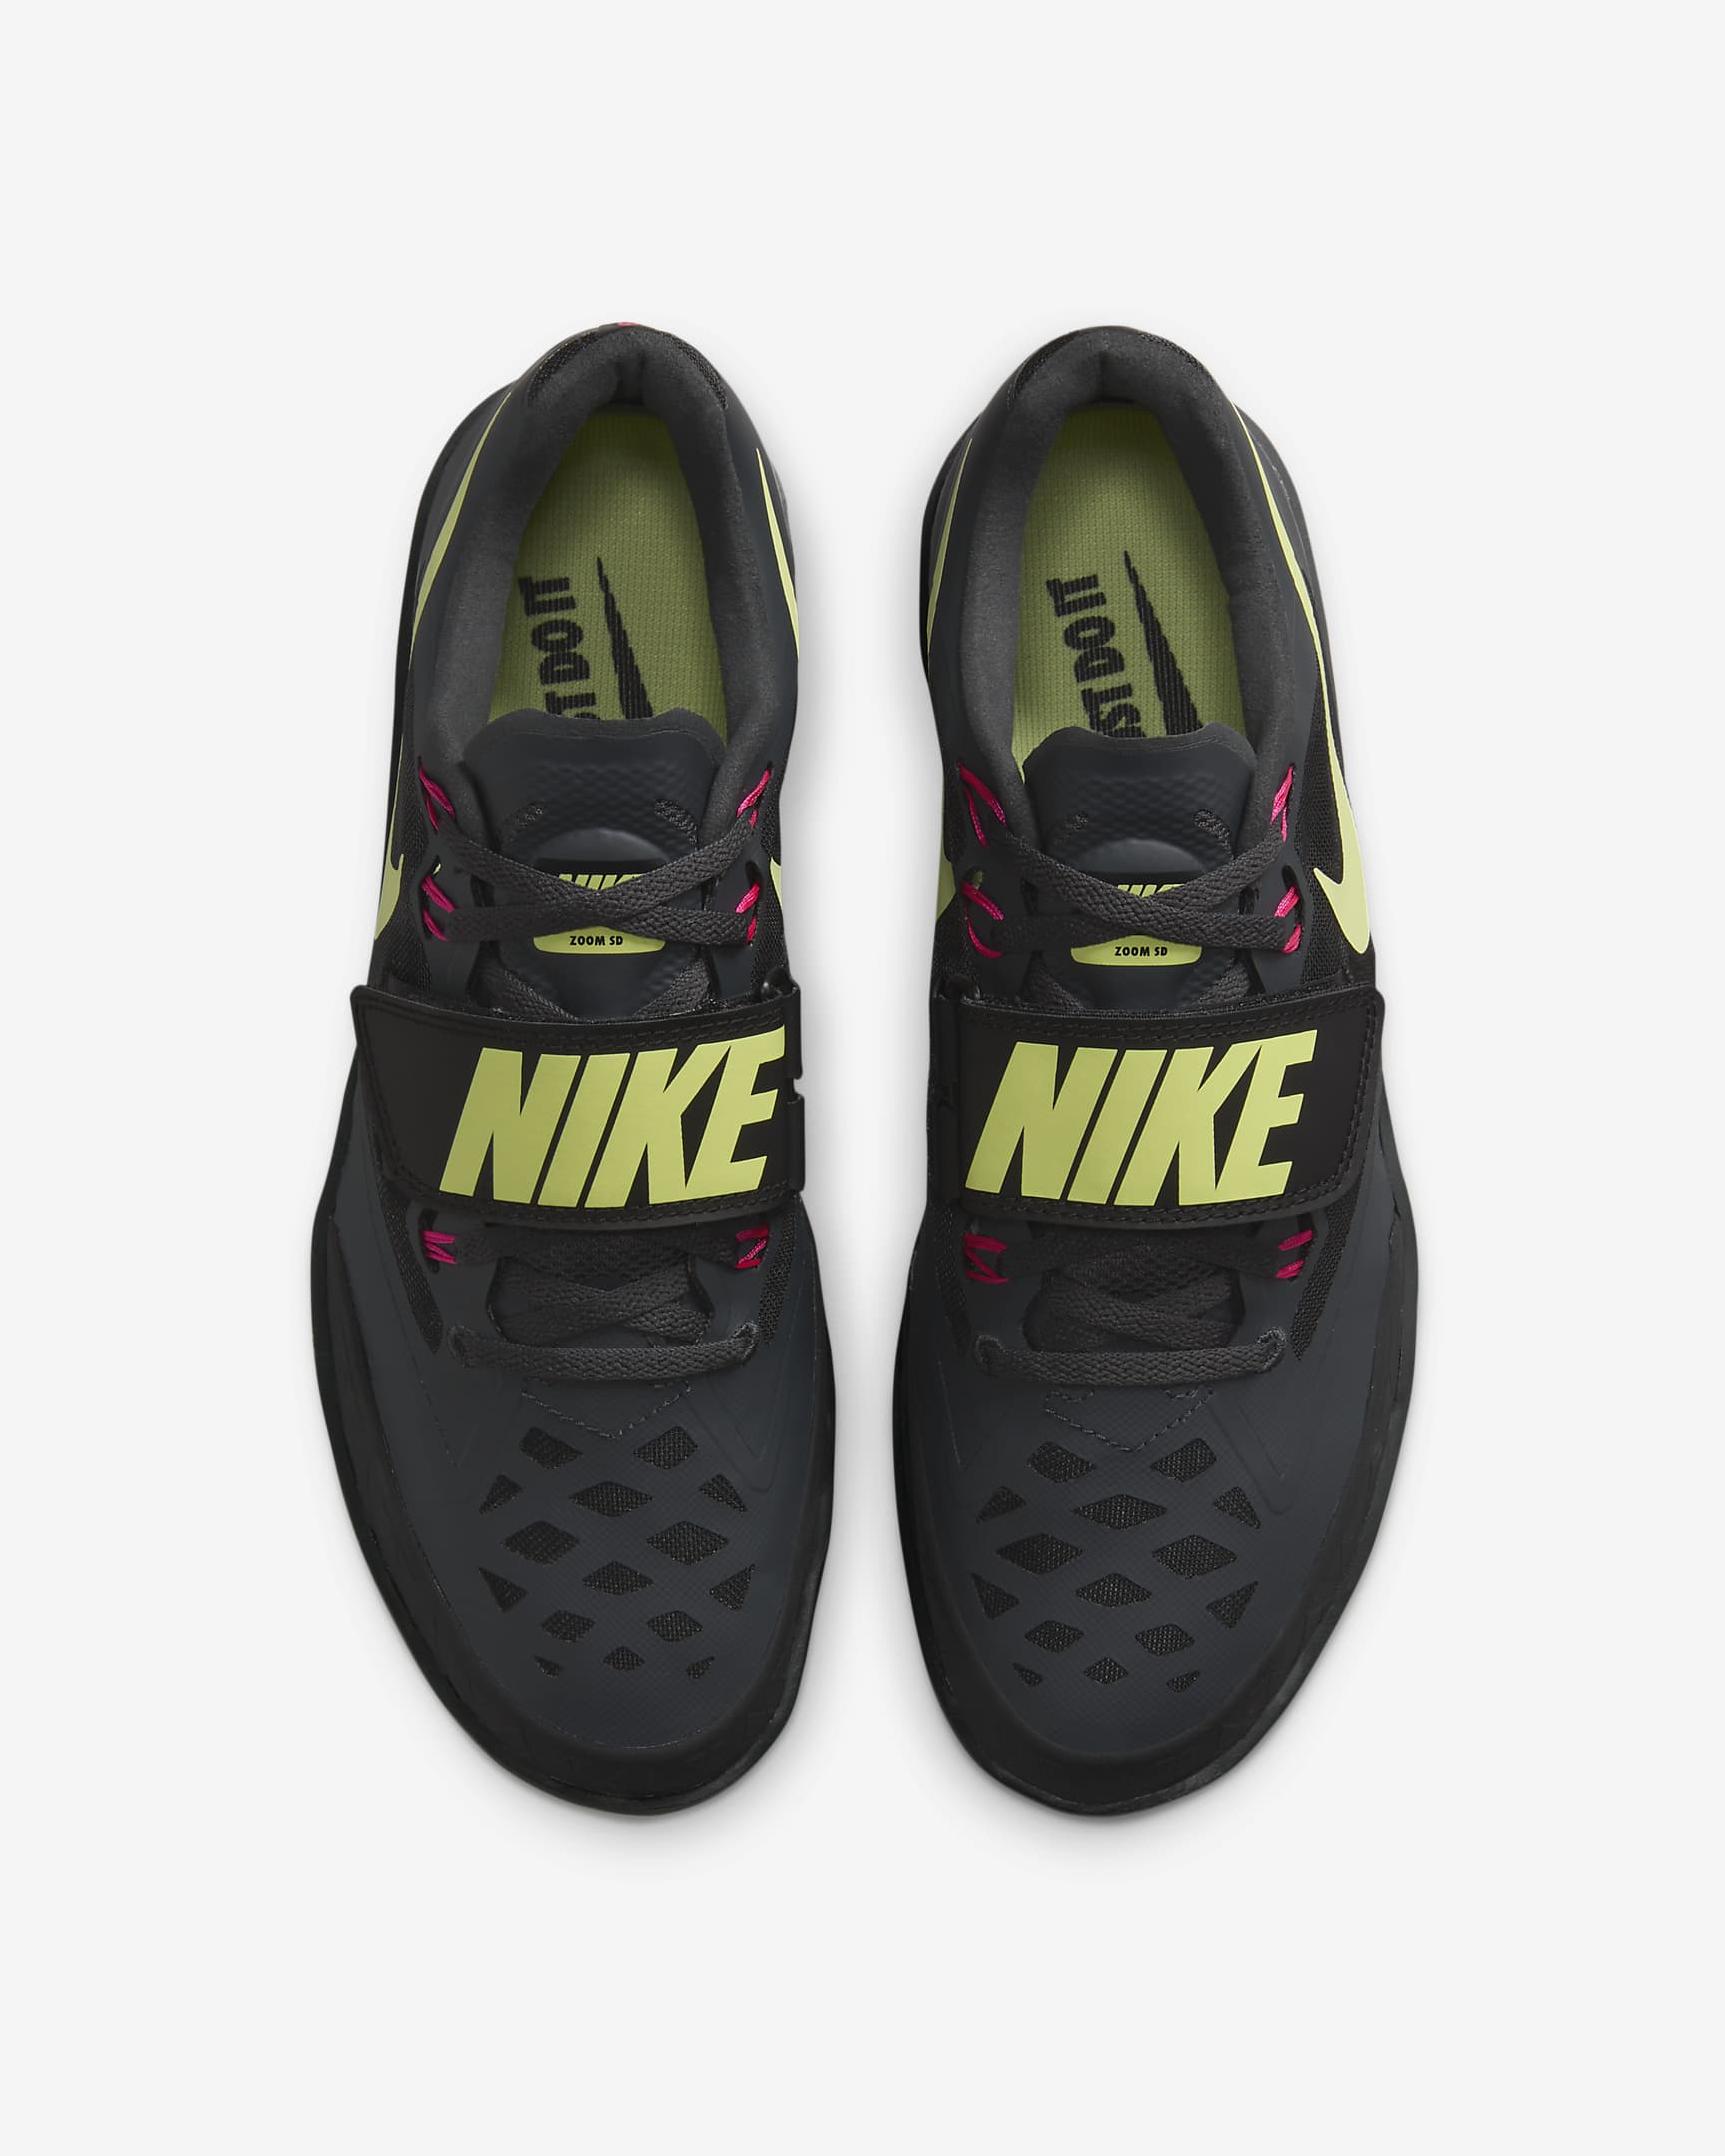 Nike Zoom SD 4 Athletics Throwing Shoes. Nike AT